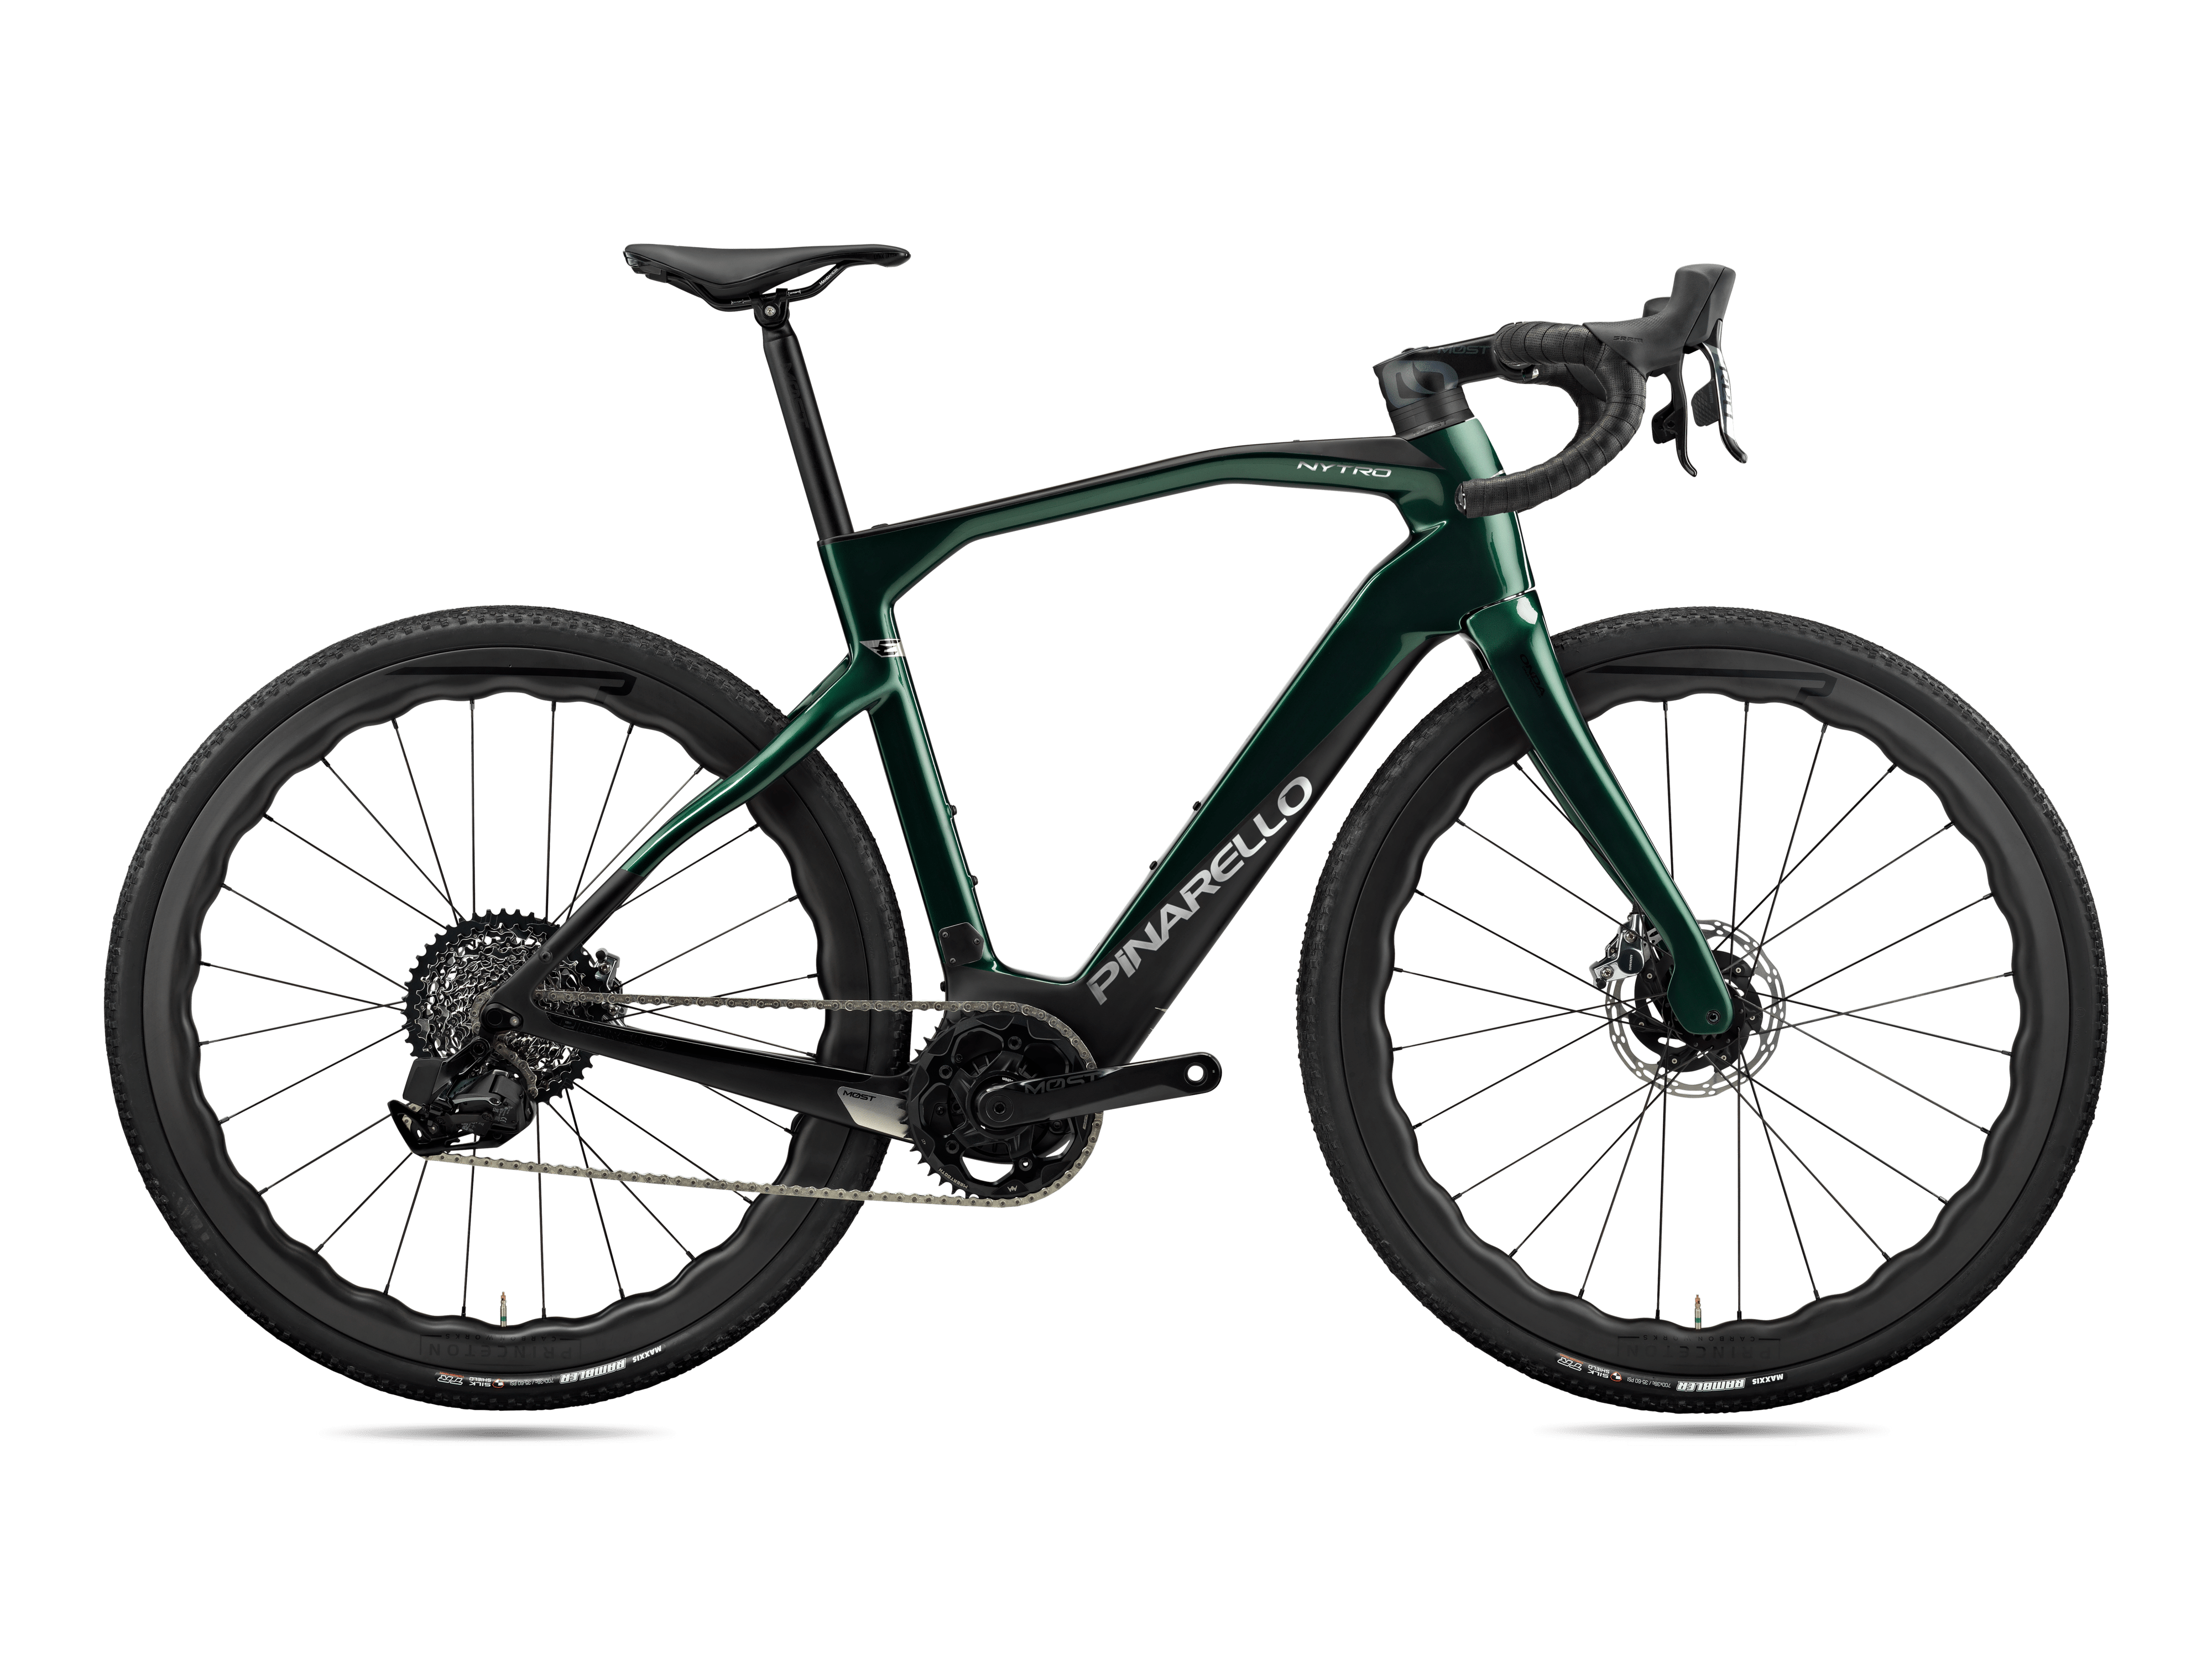 NYTRO E9 GRAVEL - ROYAL FOREST - SRAM RED AXS